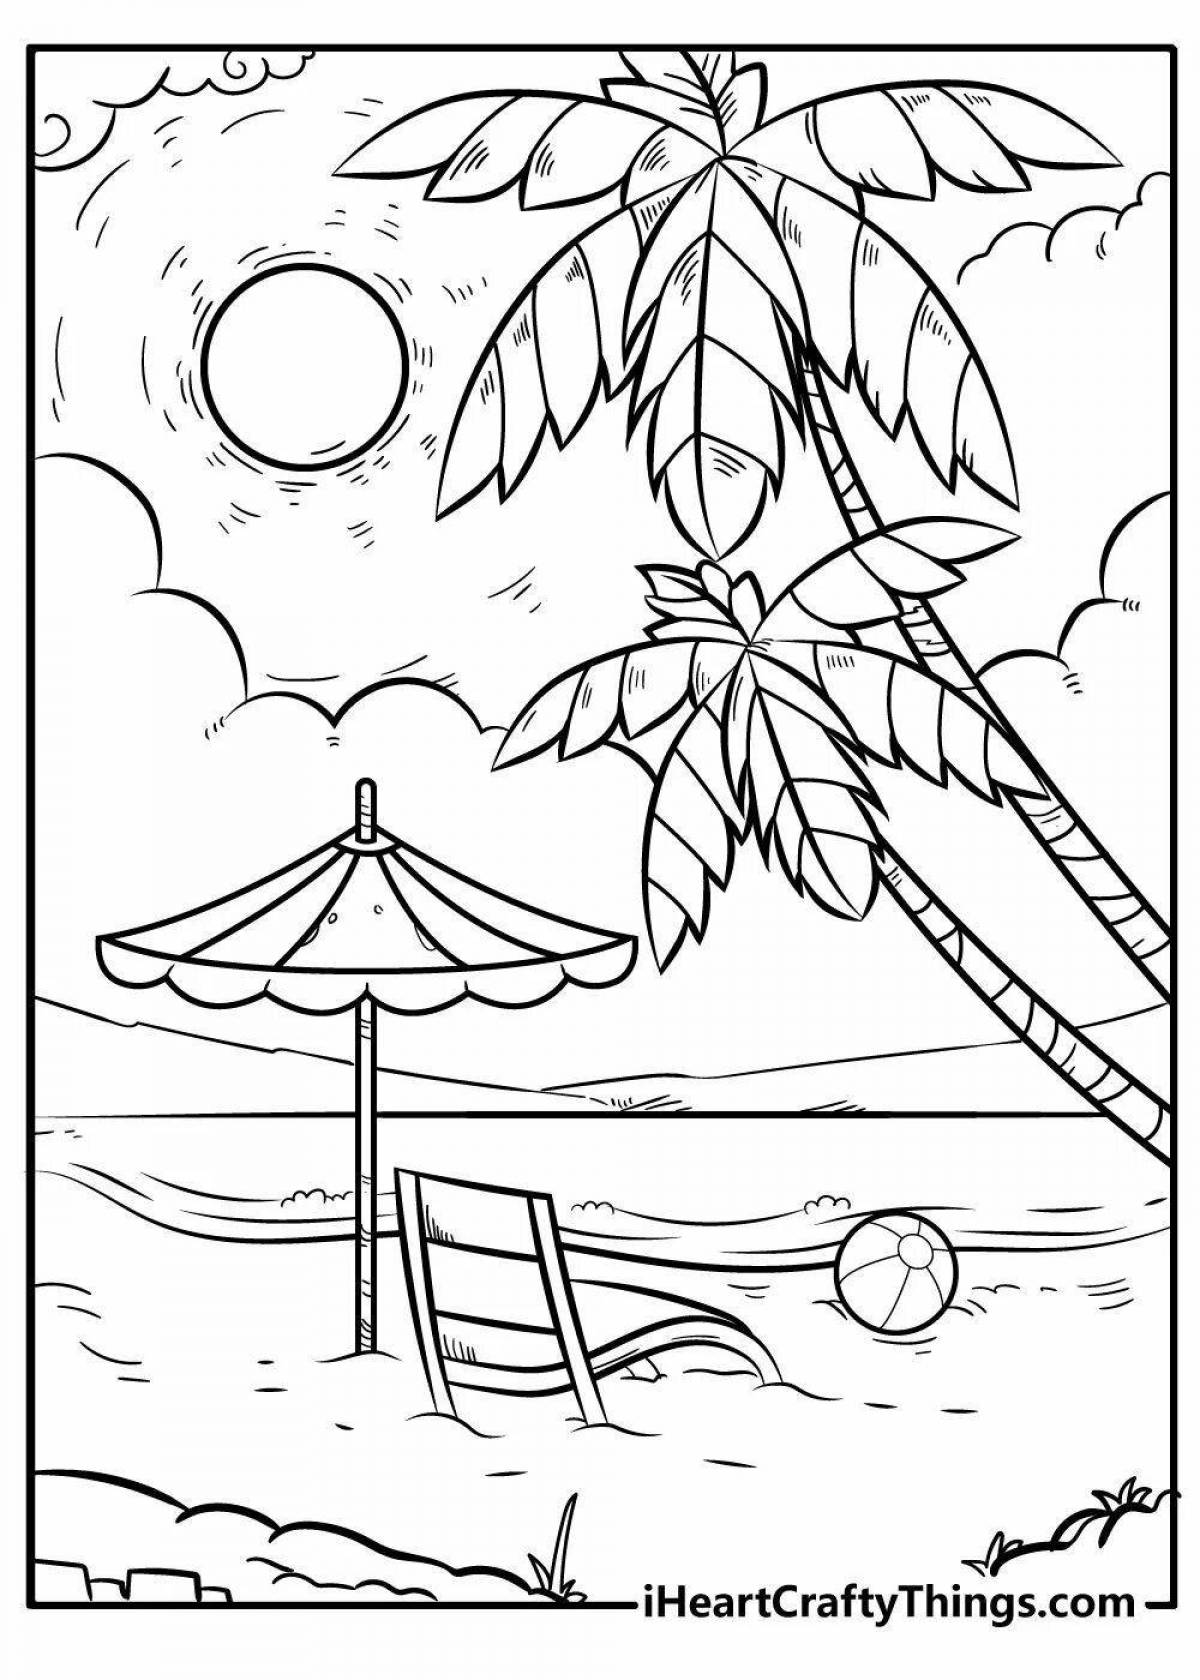 Coloring page mesmerizing beach and sea